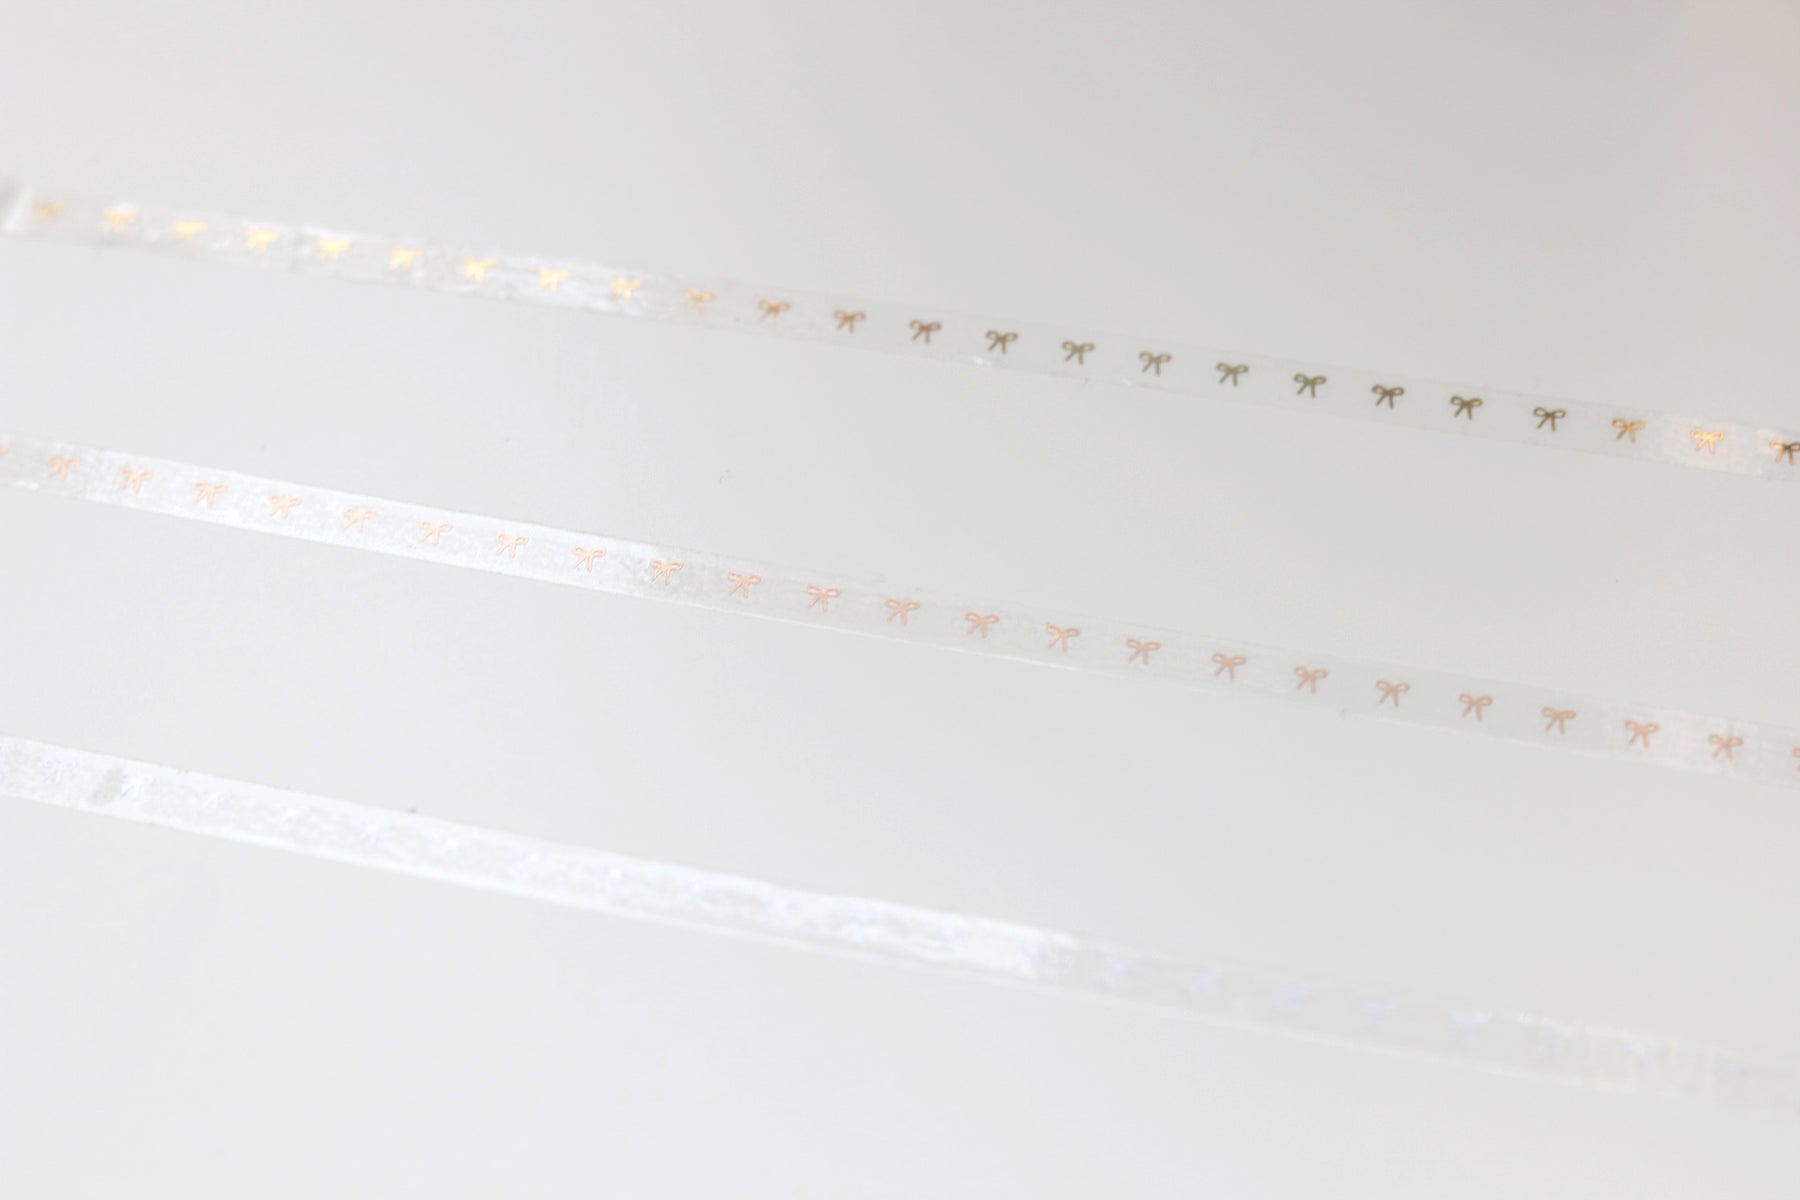 CLEAR Dainty Bow (Gold, Rg, Silver, Holo) // 5mm Washi Tape